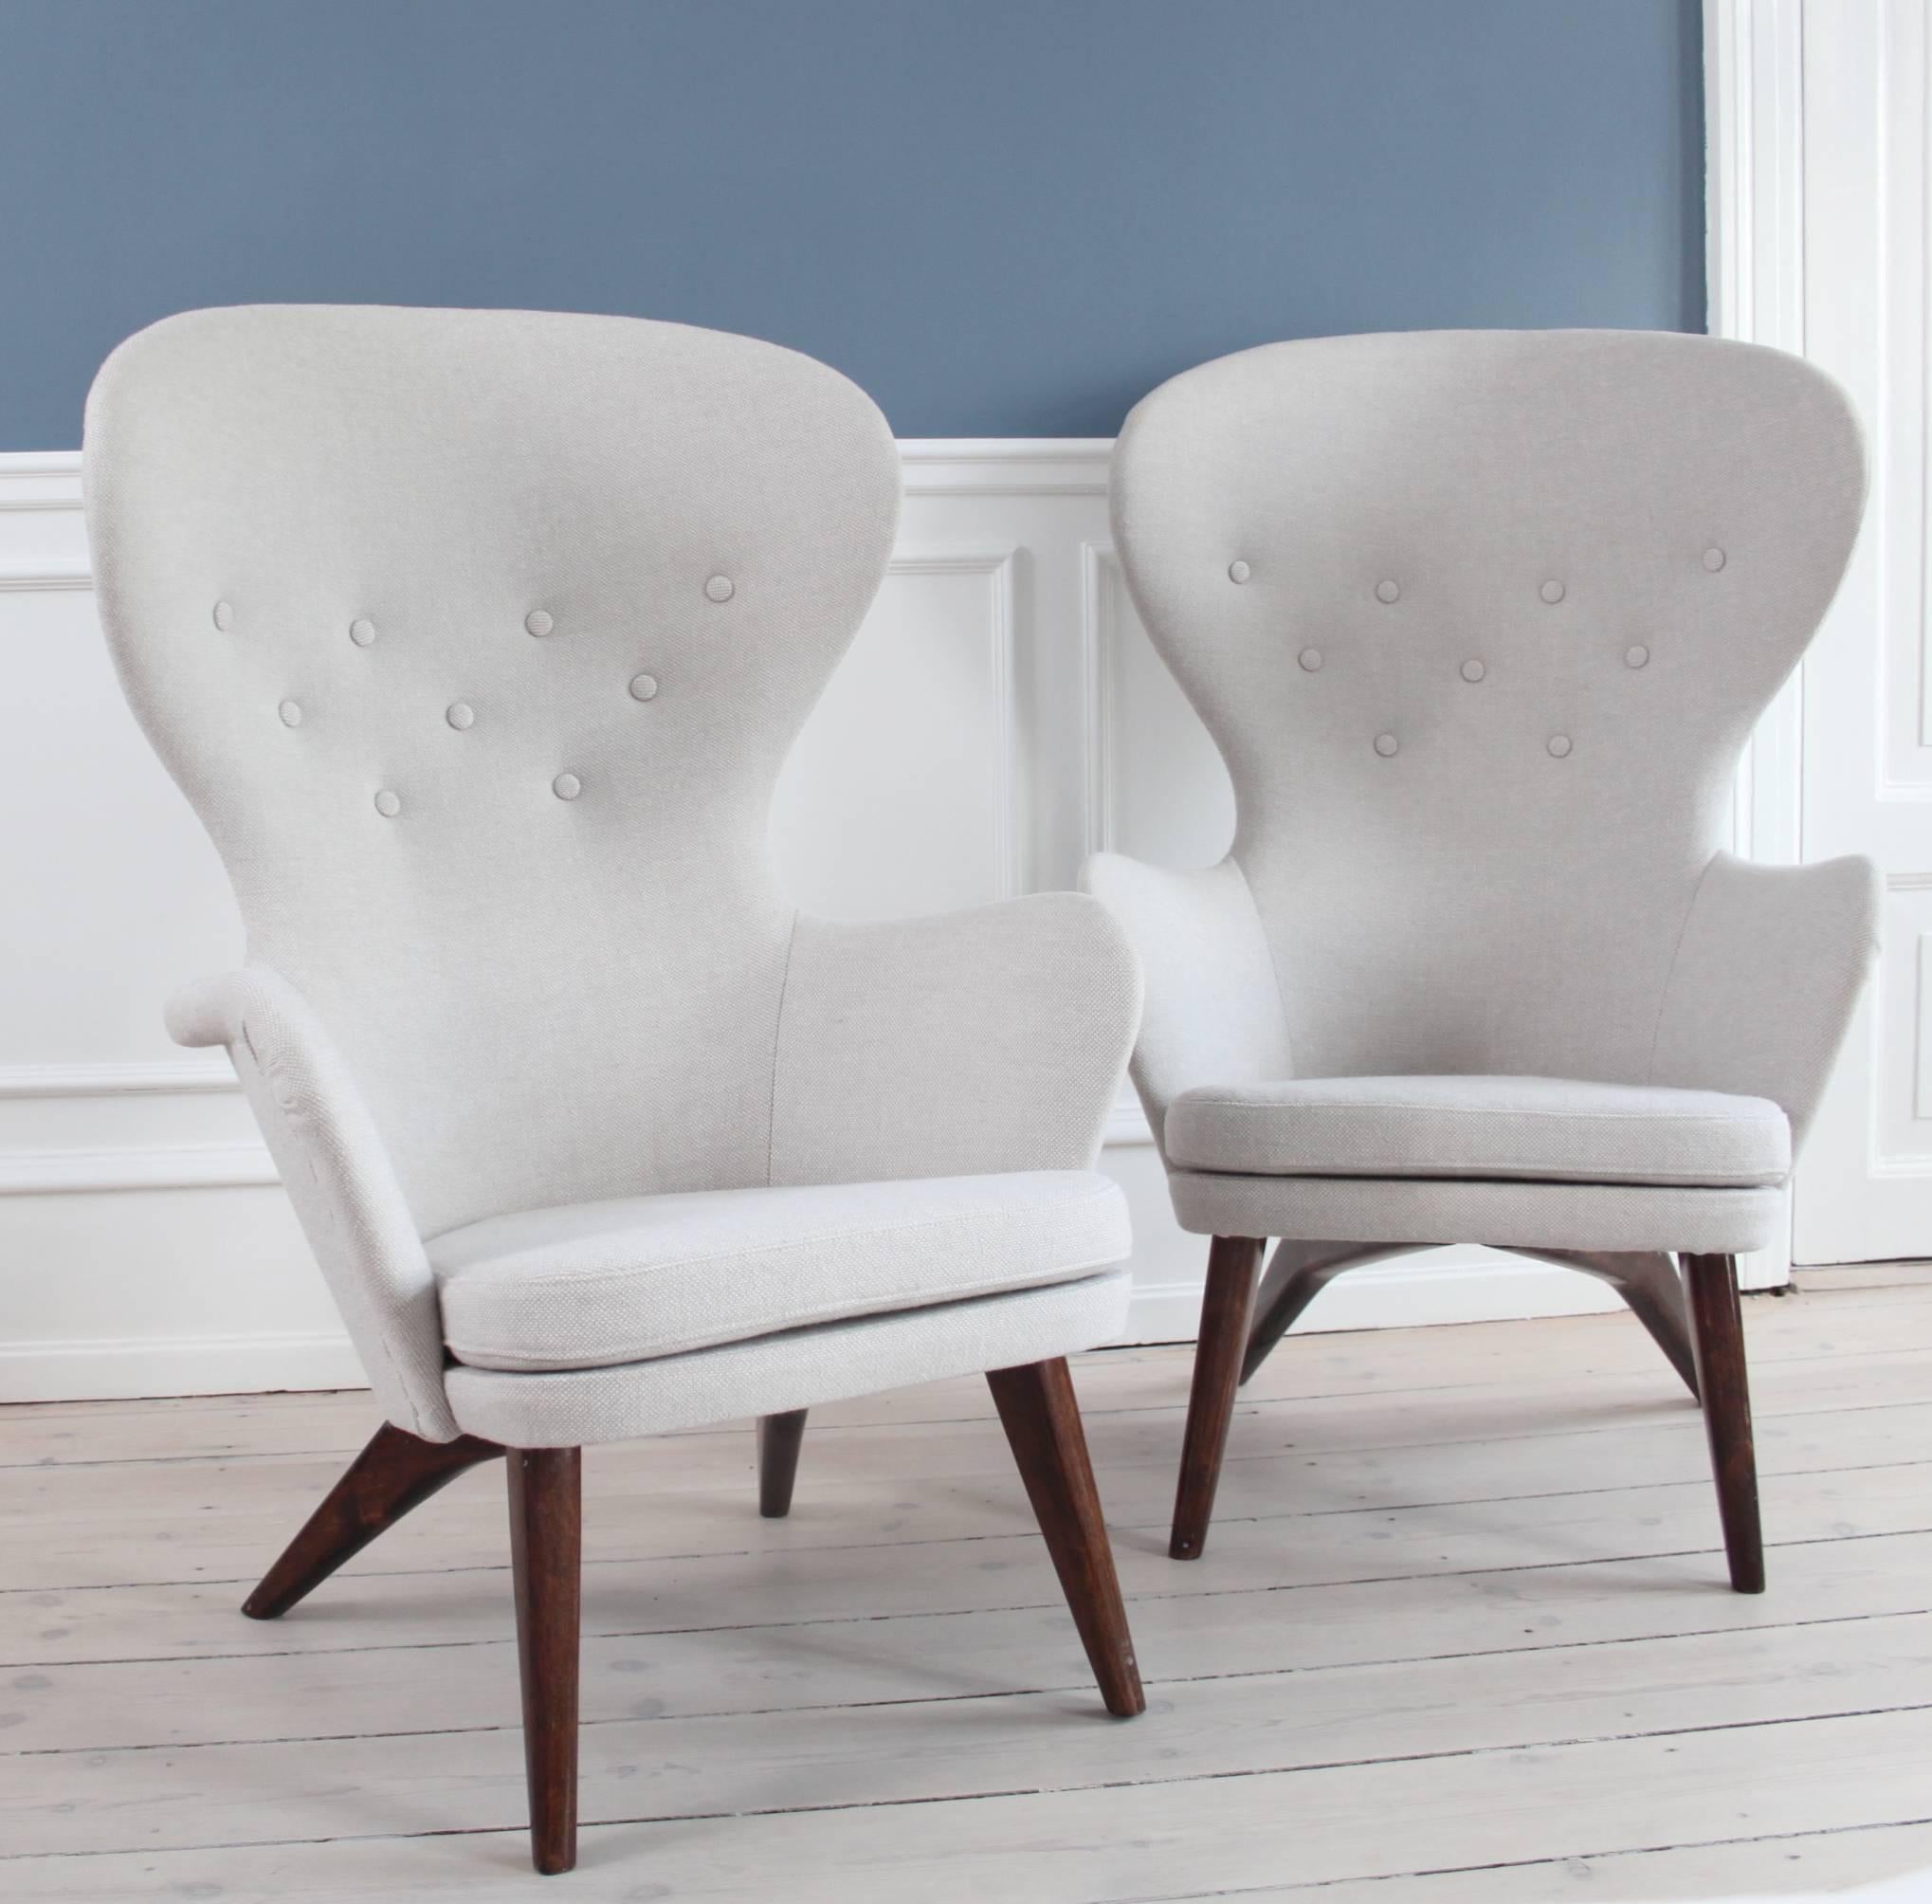 Pair of high back armchairs designed by Carl Gustav Hiort af Ornäs.

Stained wood and wool upholstery in Kvadrat.

Designed and manufactured by Hiort af Ornäs, Finland, 1950s.
 
Stamped ”Hiort Tuote Puunveiosto Helsinki